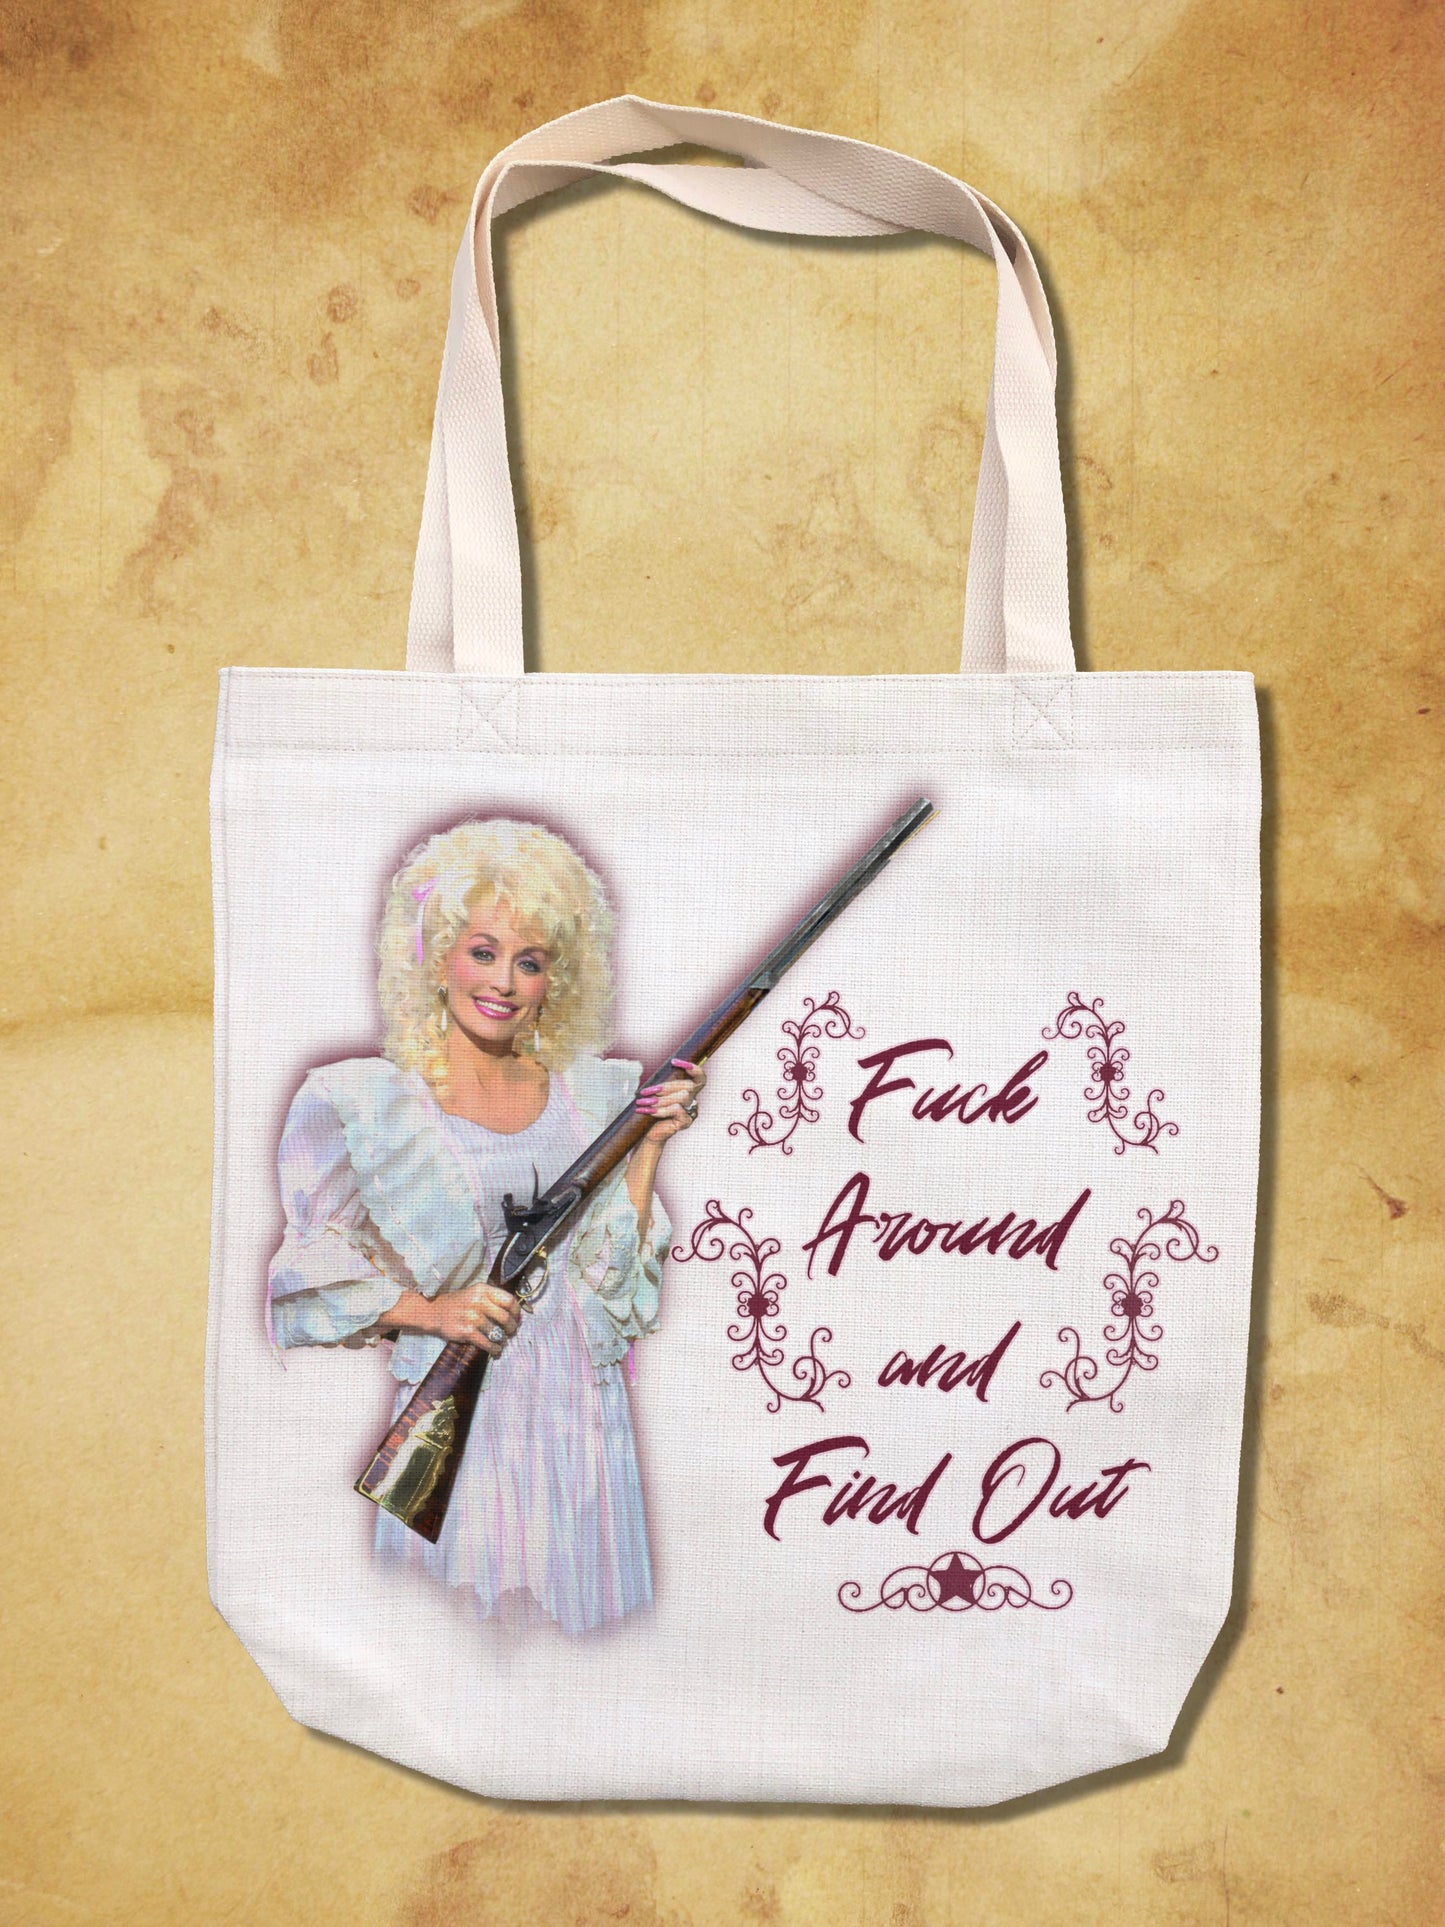 Dolly Parton "Find Out" Tote Bag